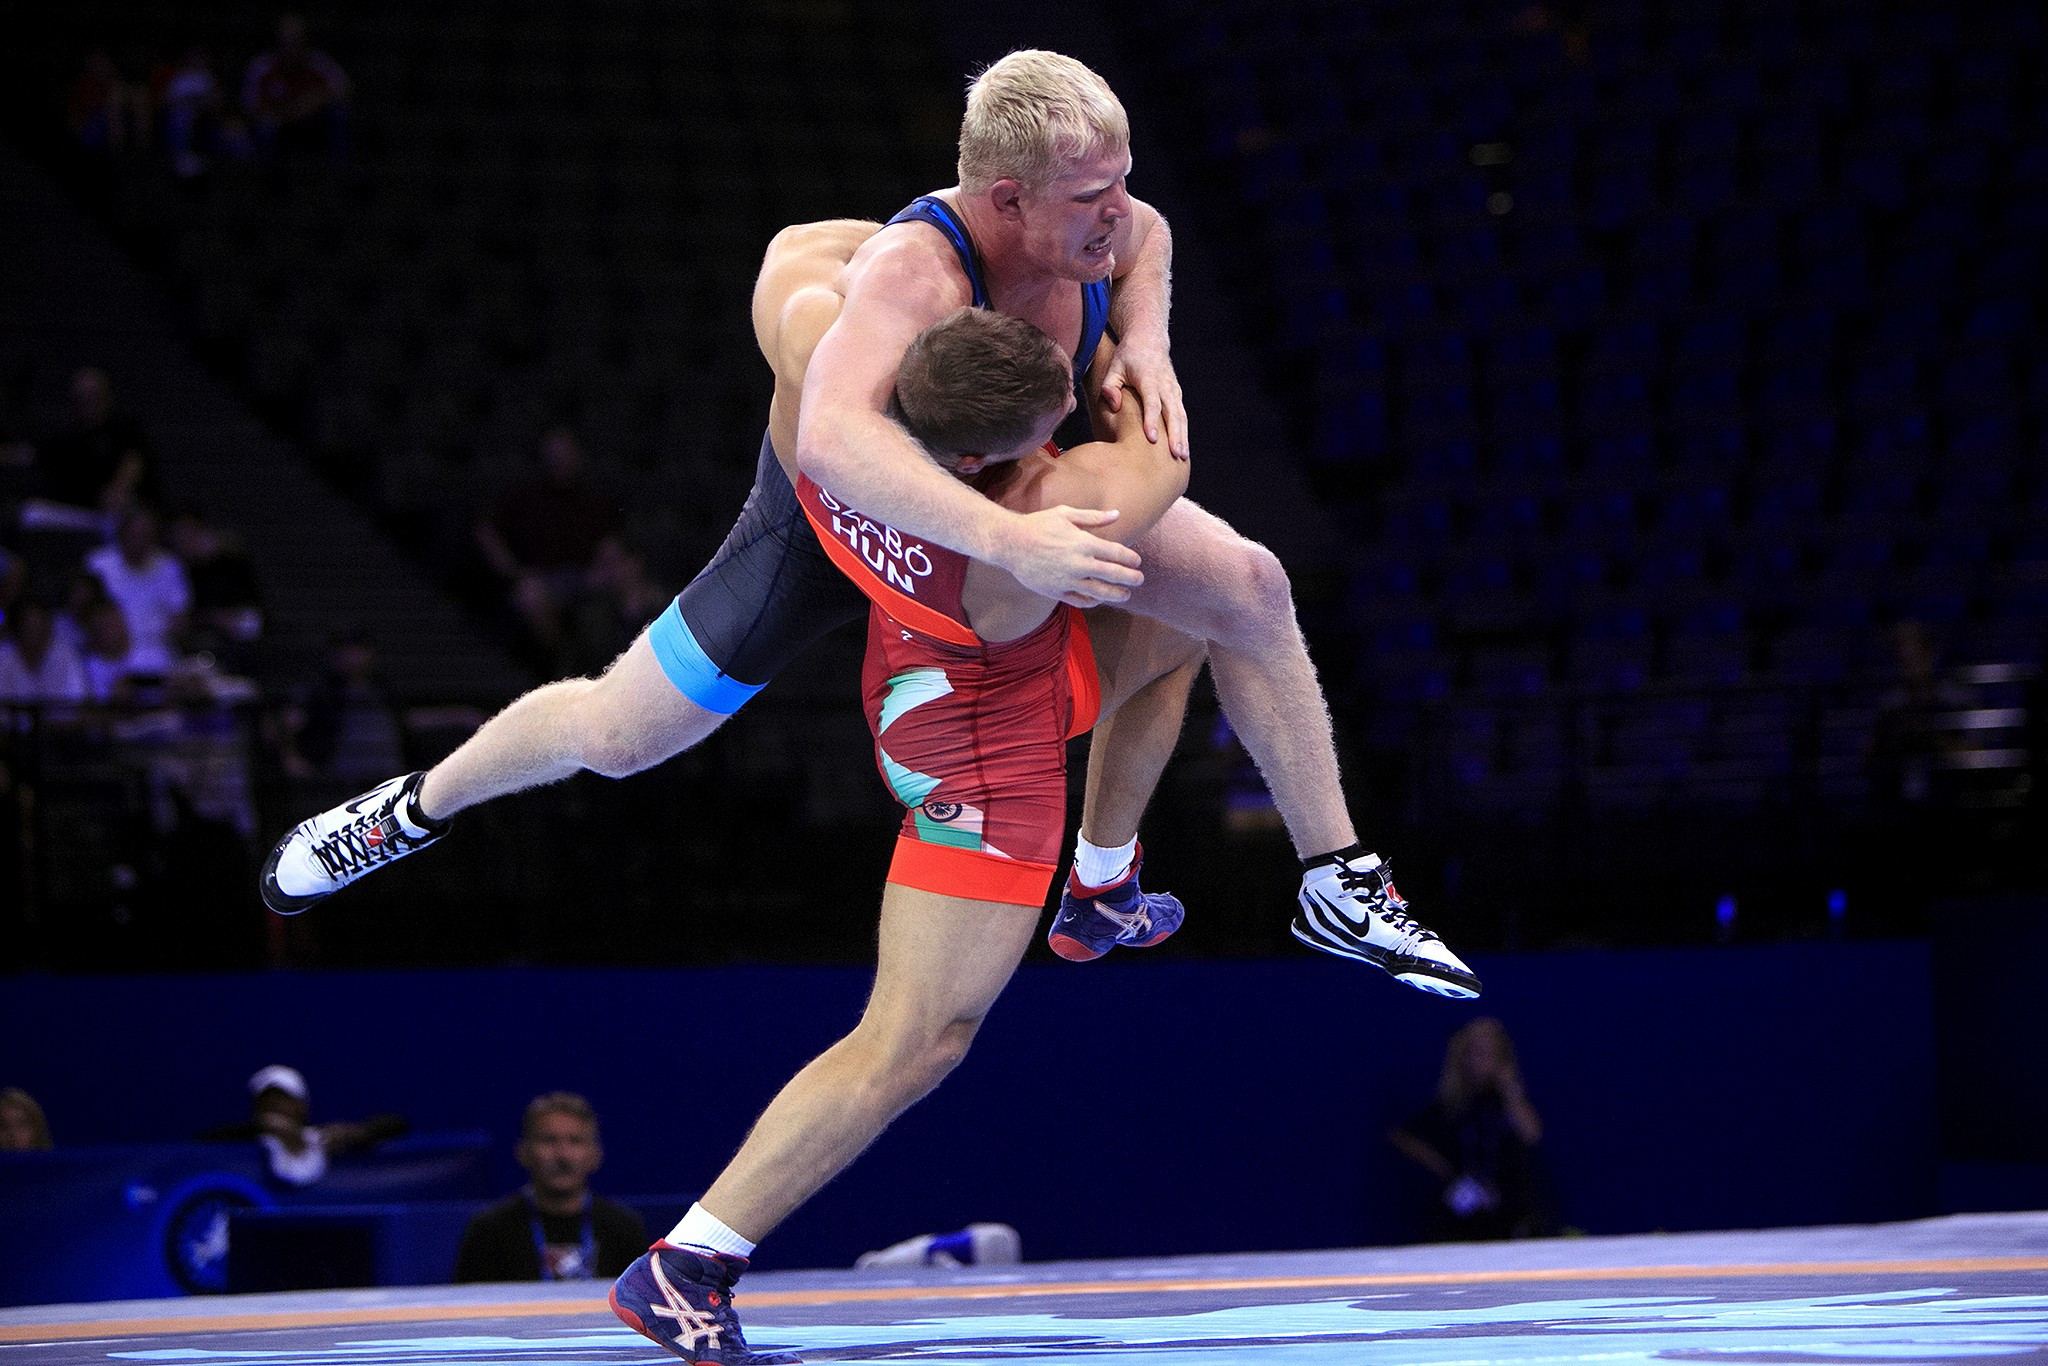 UWW Wrestling World Championships 2017 Day two of competition